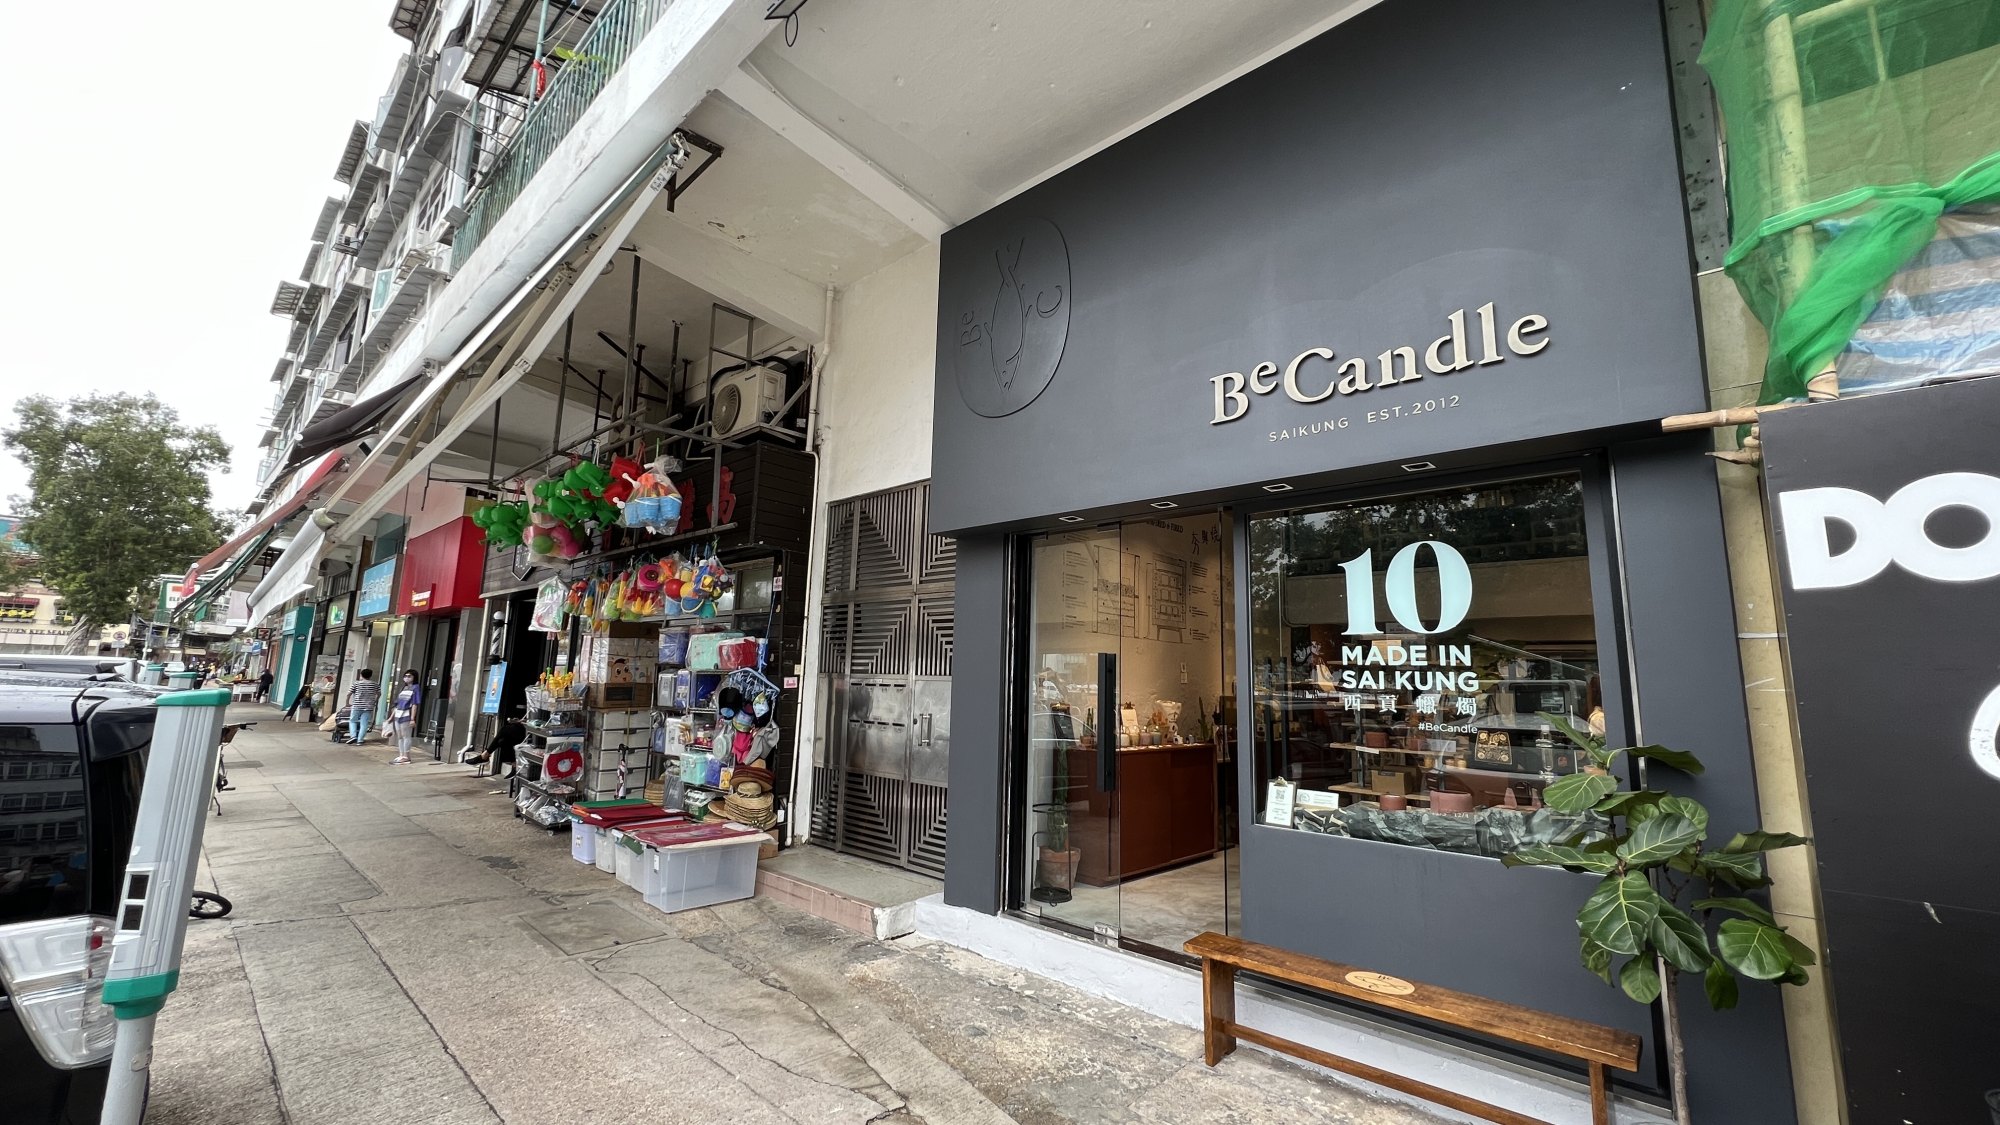 BeCandle, now on Sai Kung’s waterfront, is a retail shop and studio/workshop.